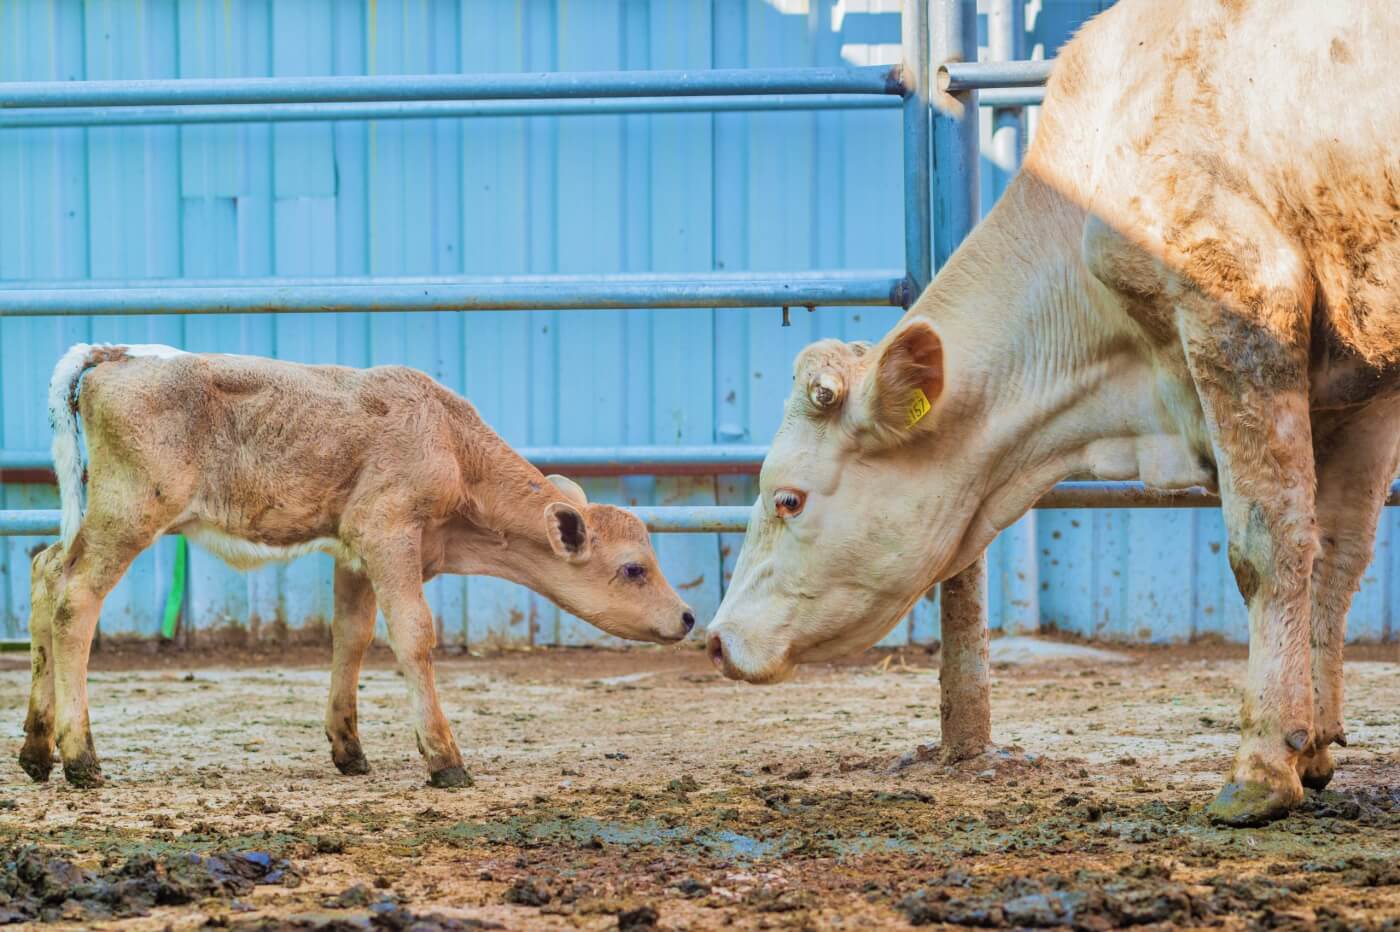 mother cow nearly touching noses with baby cow to show how Starbucks perpetuates immense cruelty to the animals via their vegan milk surcharge